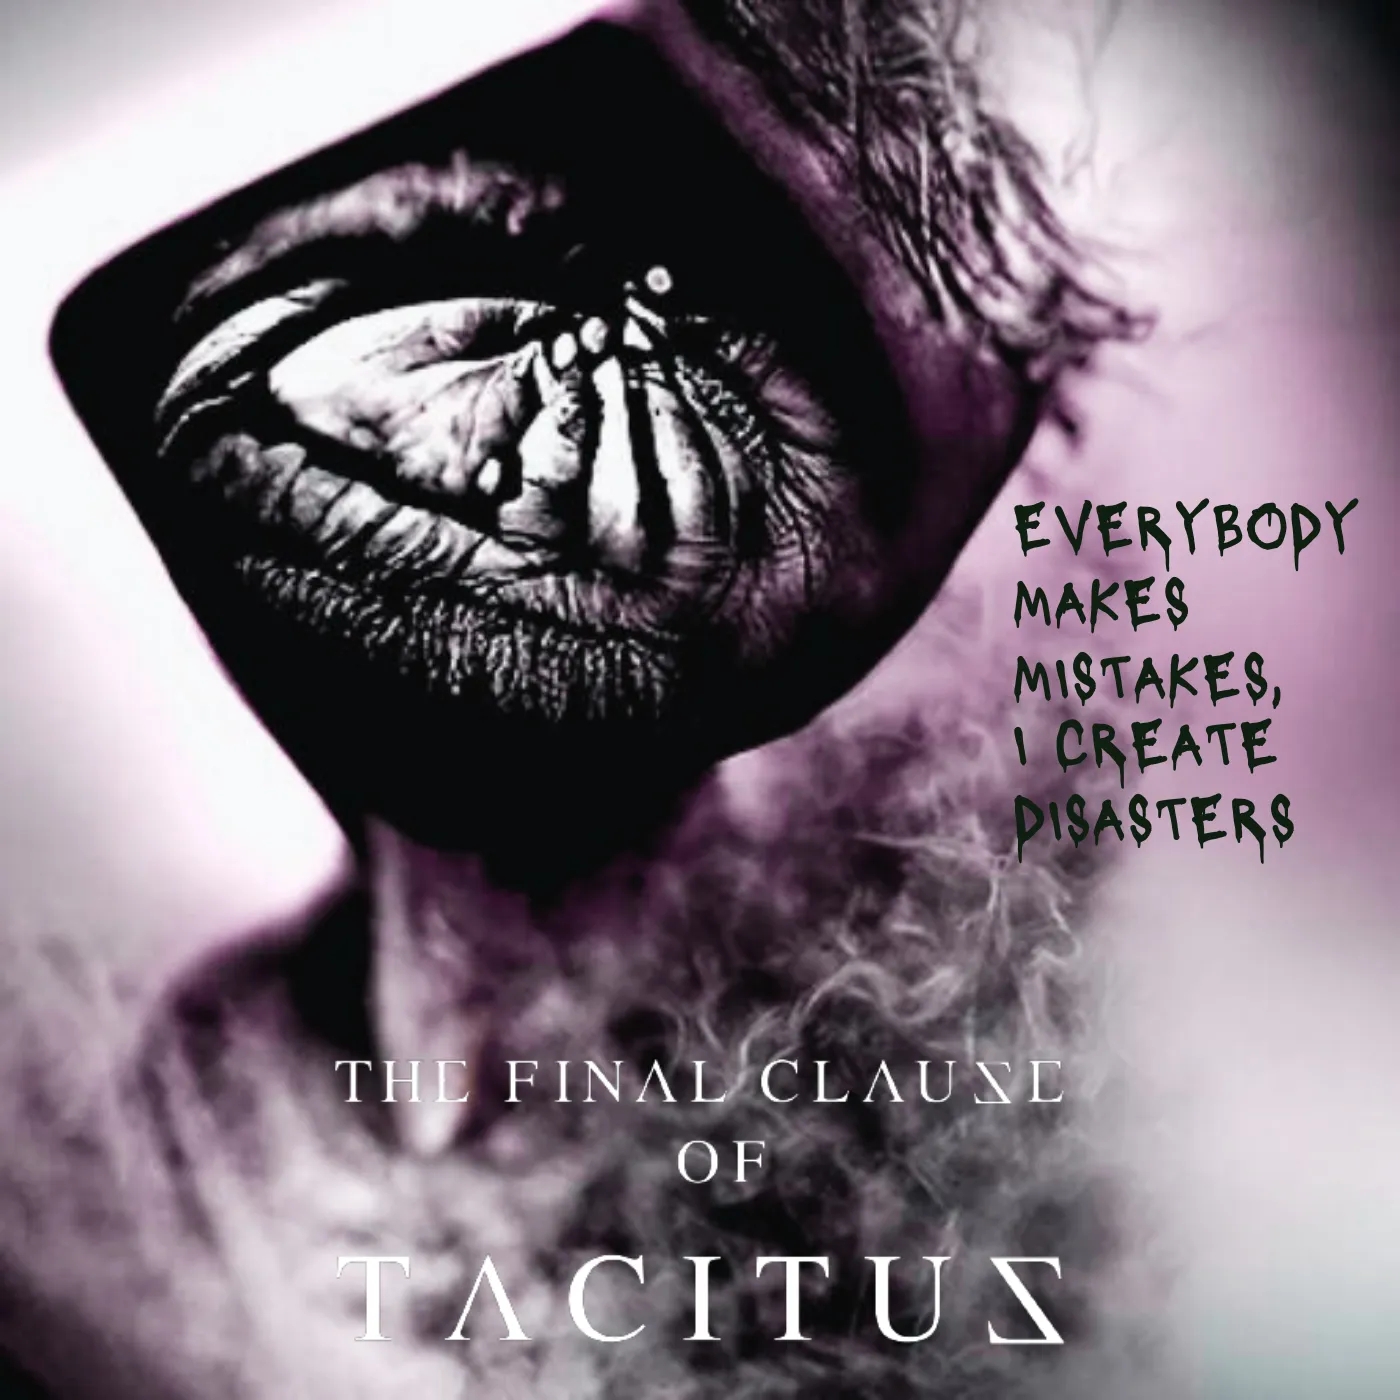 LISTEN: “Everybody Makes Mistakes, I Create Disasters” by The Final Clause of Tacitus